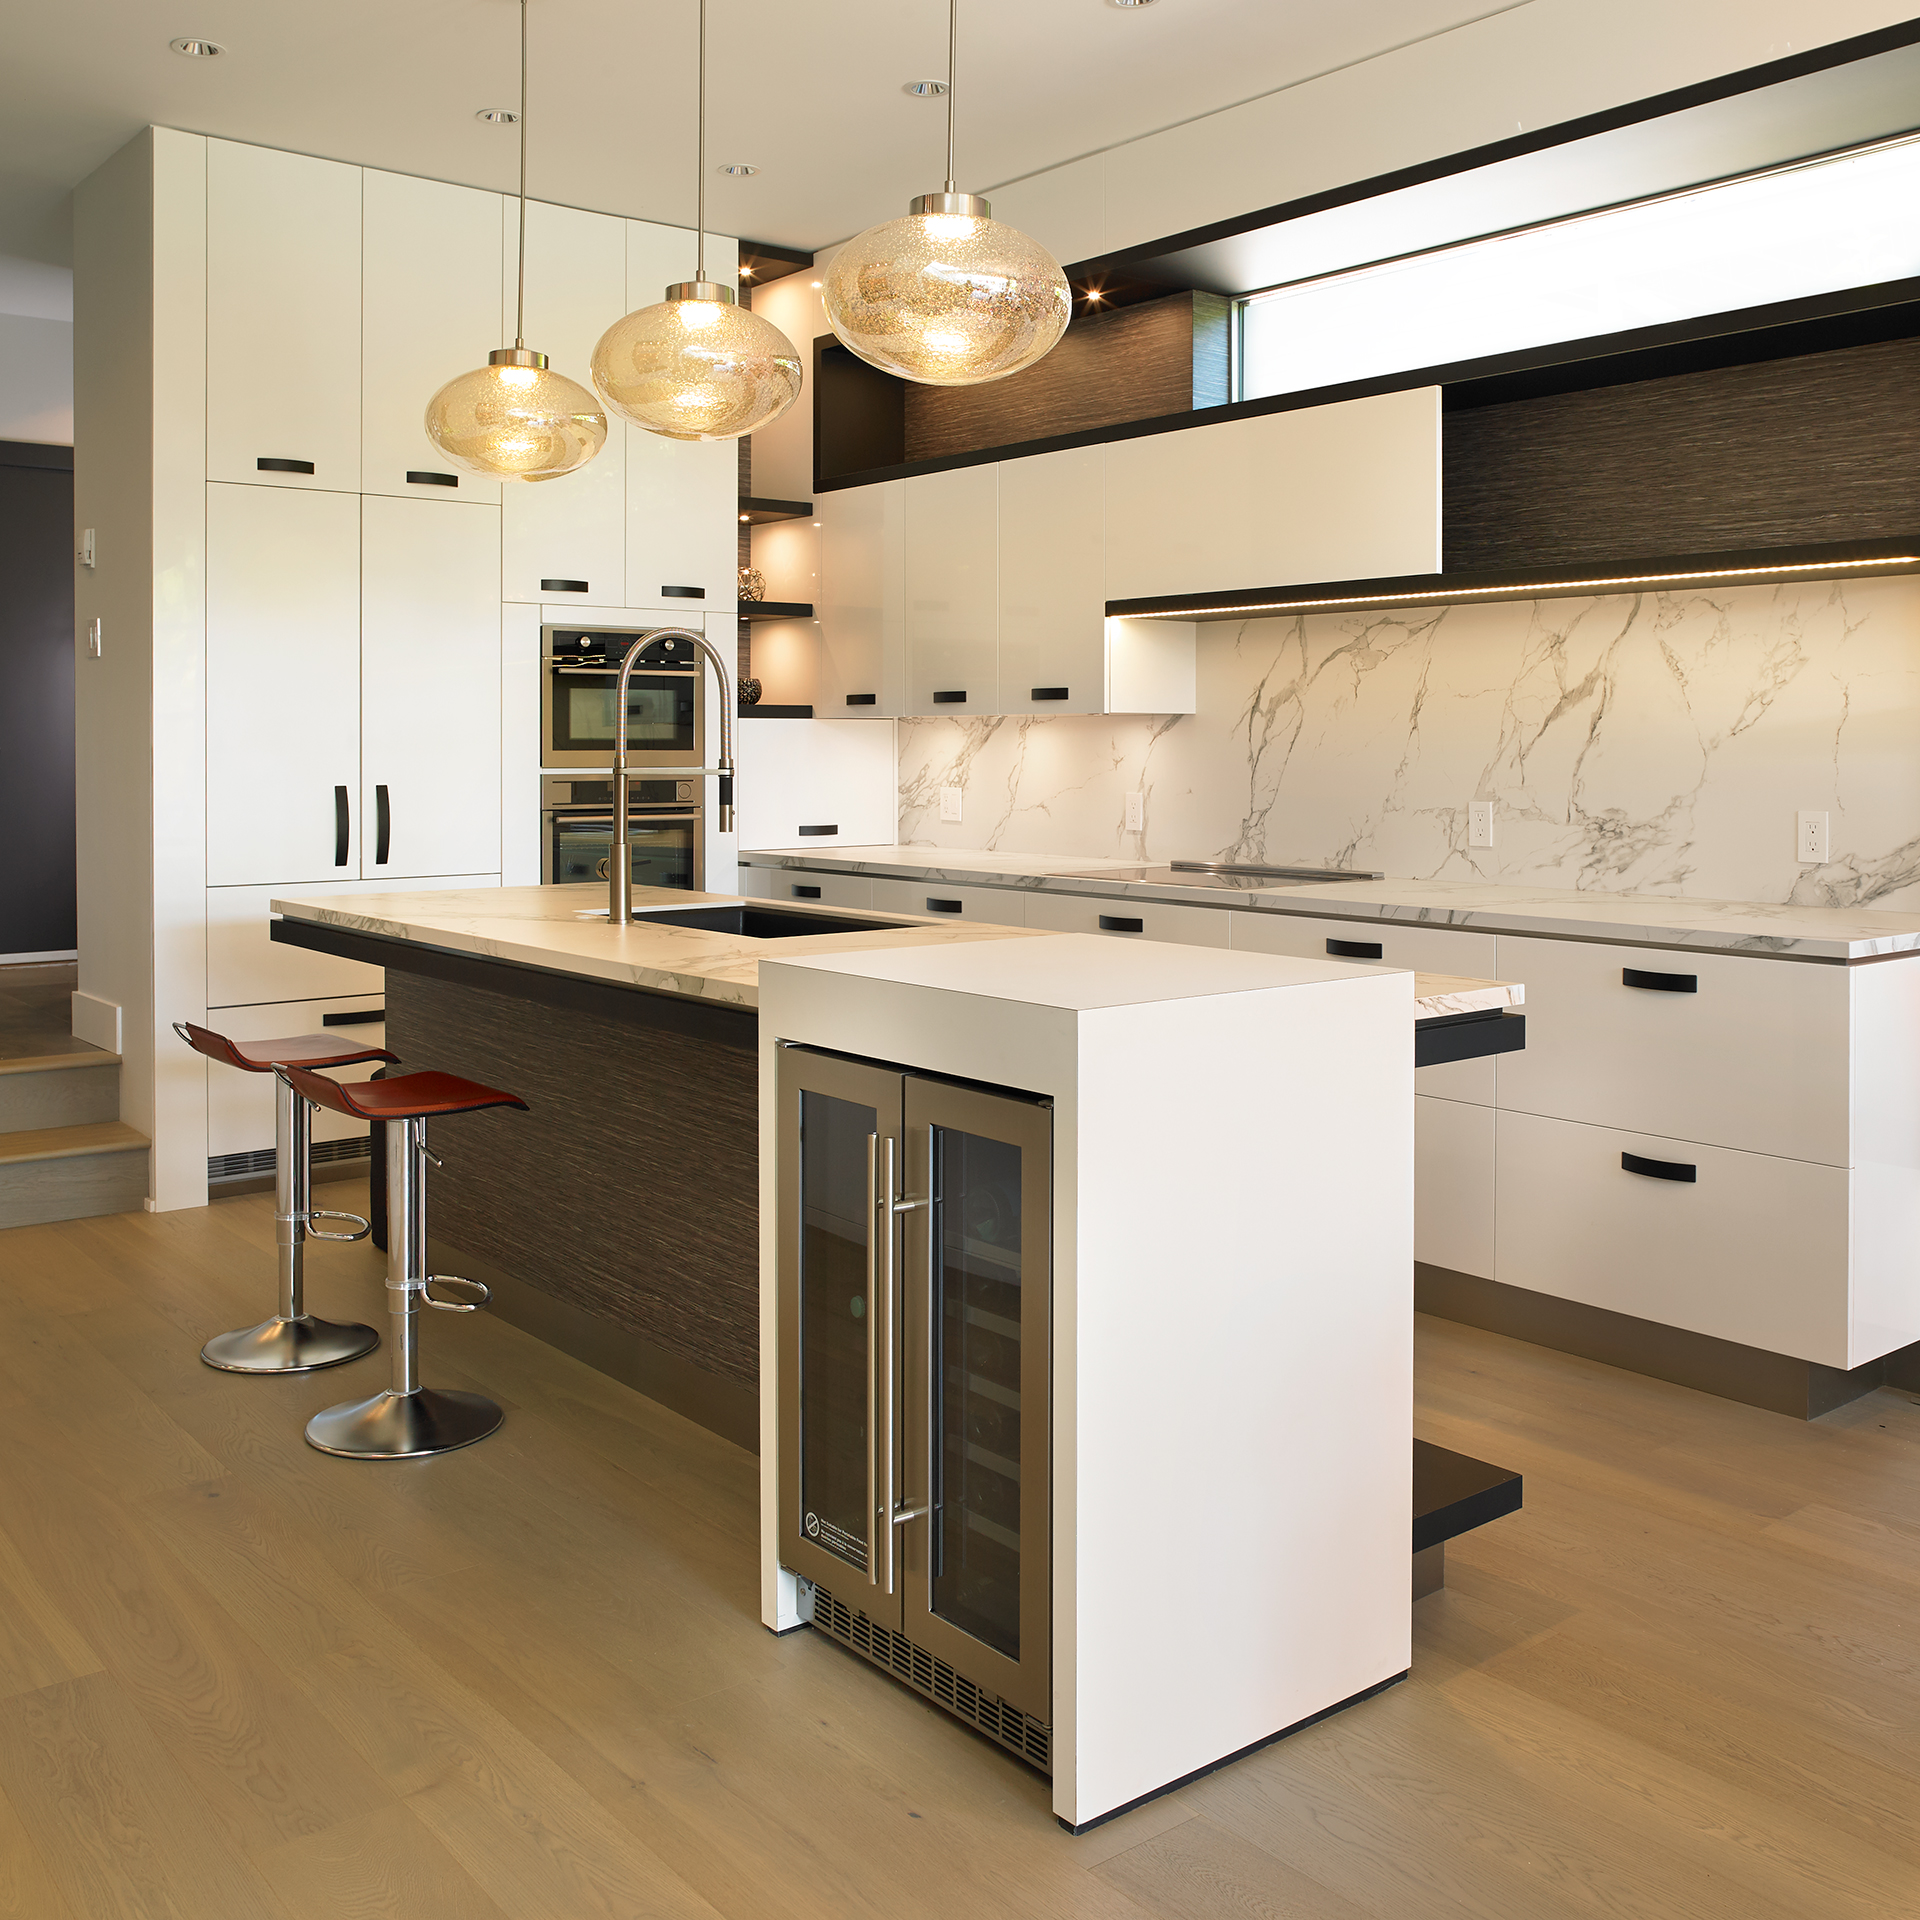 Art Meets Function in Euro-Style Kitchen – Modern Home Magazine